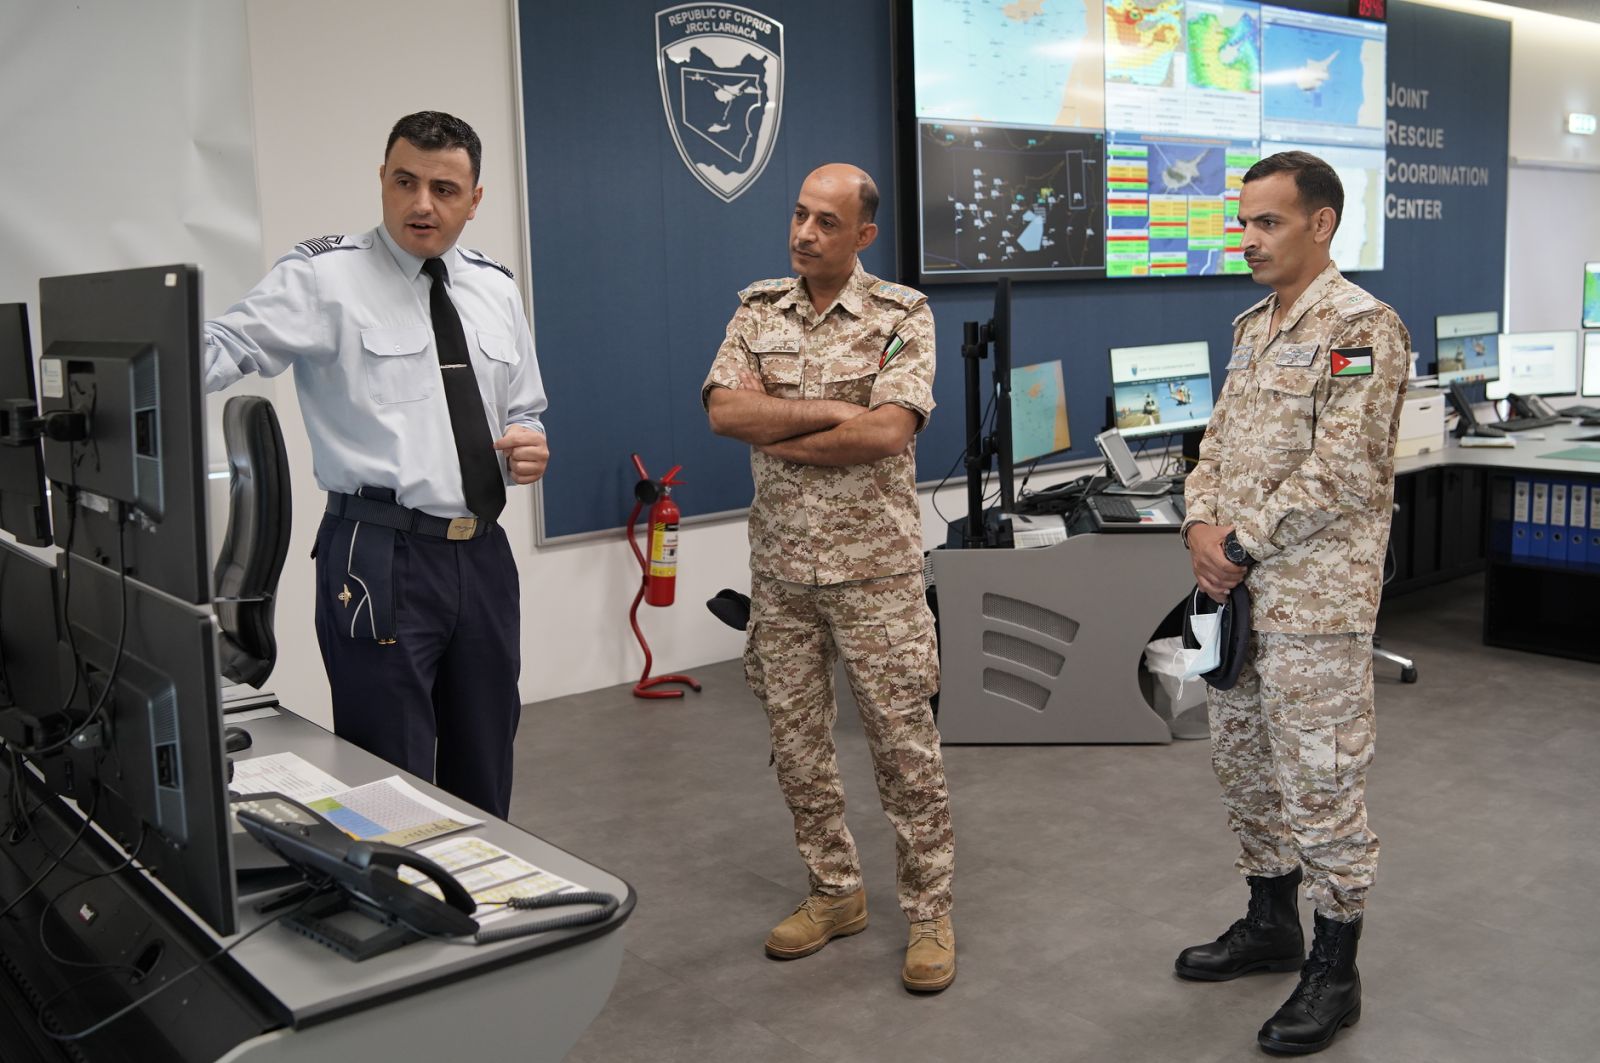 Visit of Officers of the Armed Forces of the Hashemite Kingdom of Jordan at the JRCC Larnaca